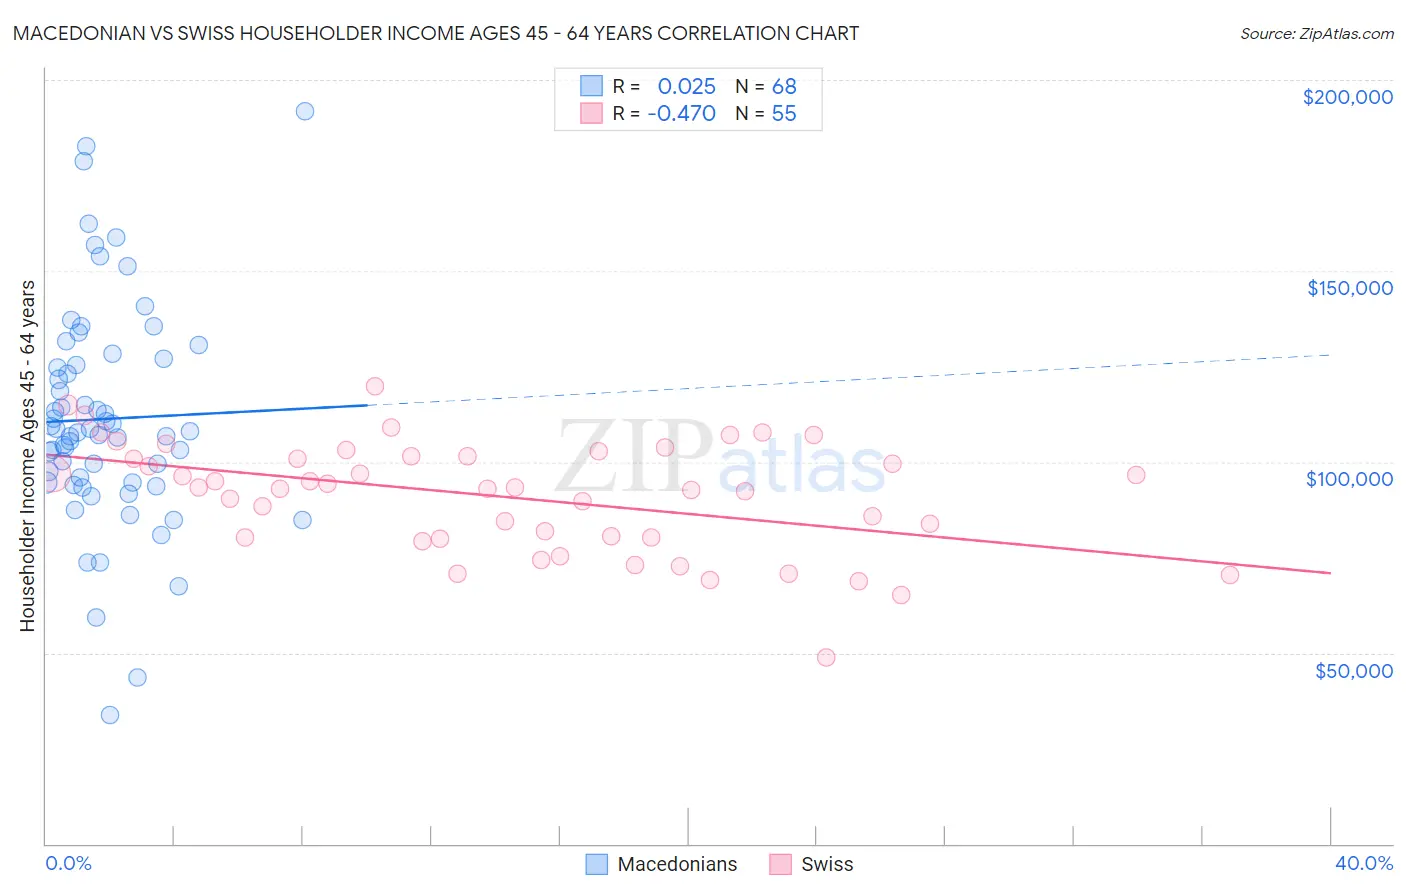 Macedonian vs Swiss Householder Income Ages 45 - 64 years